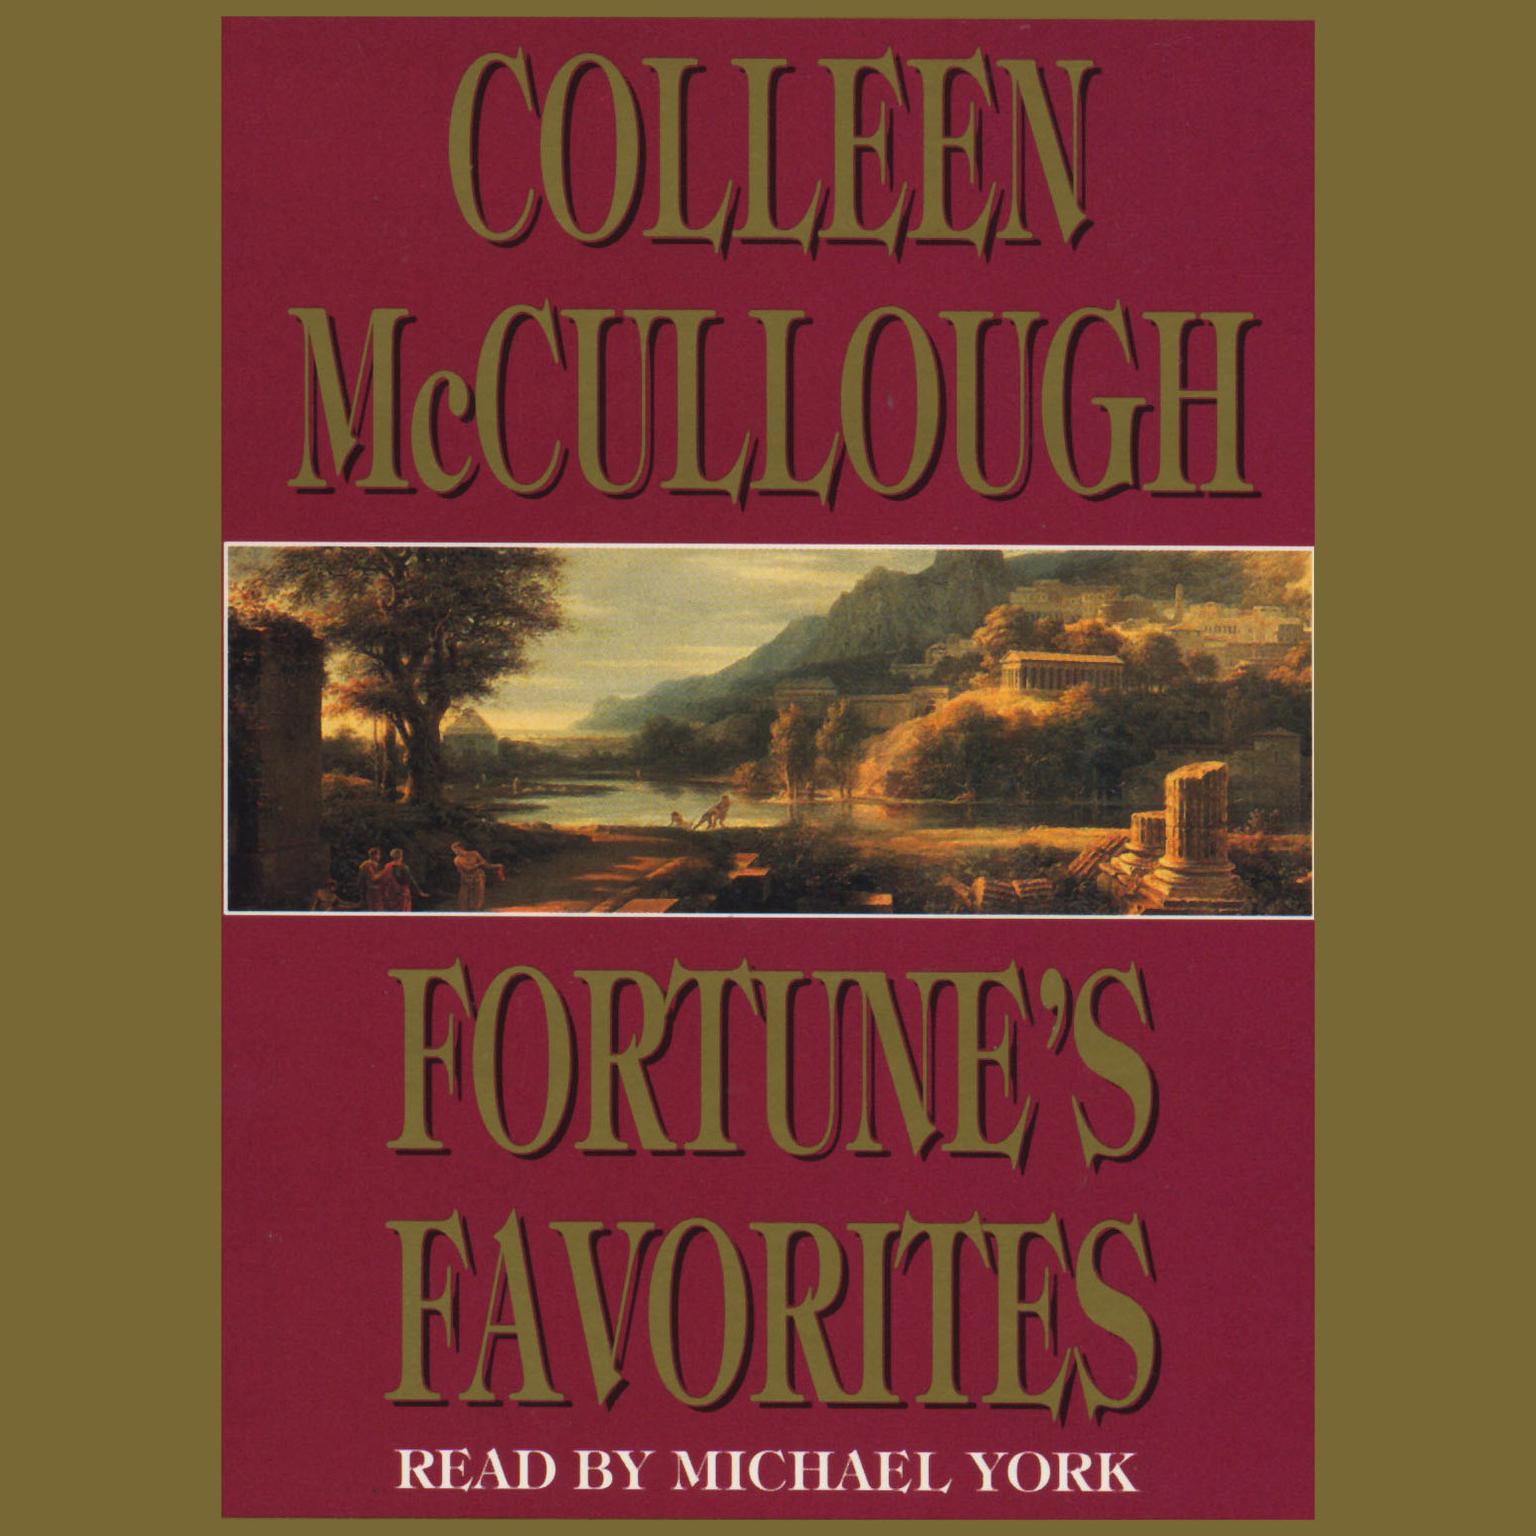 Fortune’s Favorites (Abridged) Audiobook, by Colleen McCullough